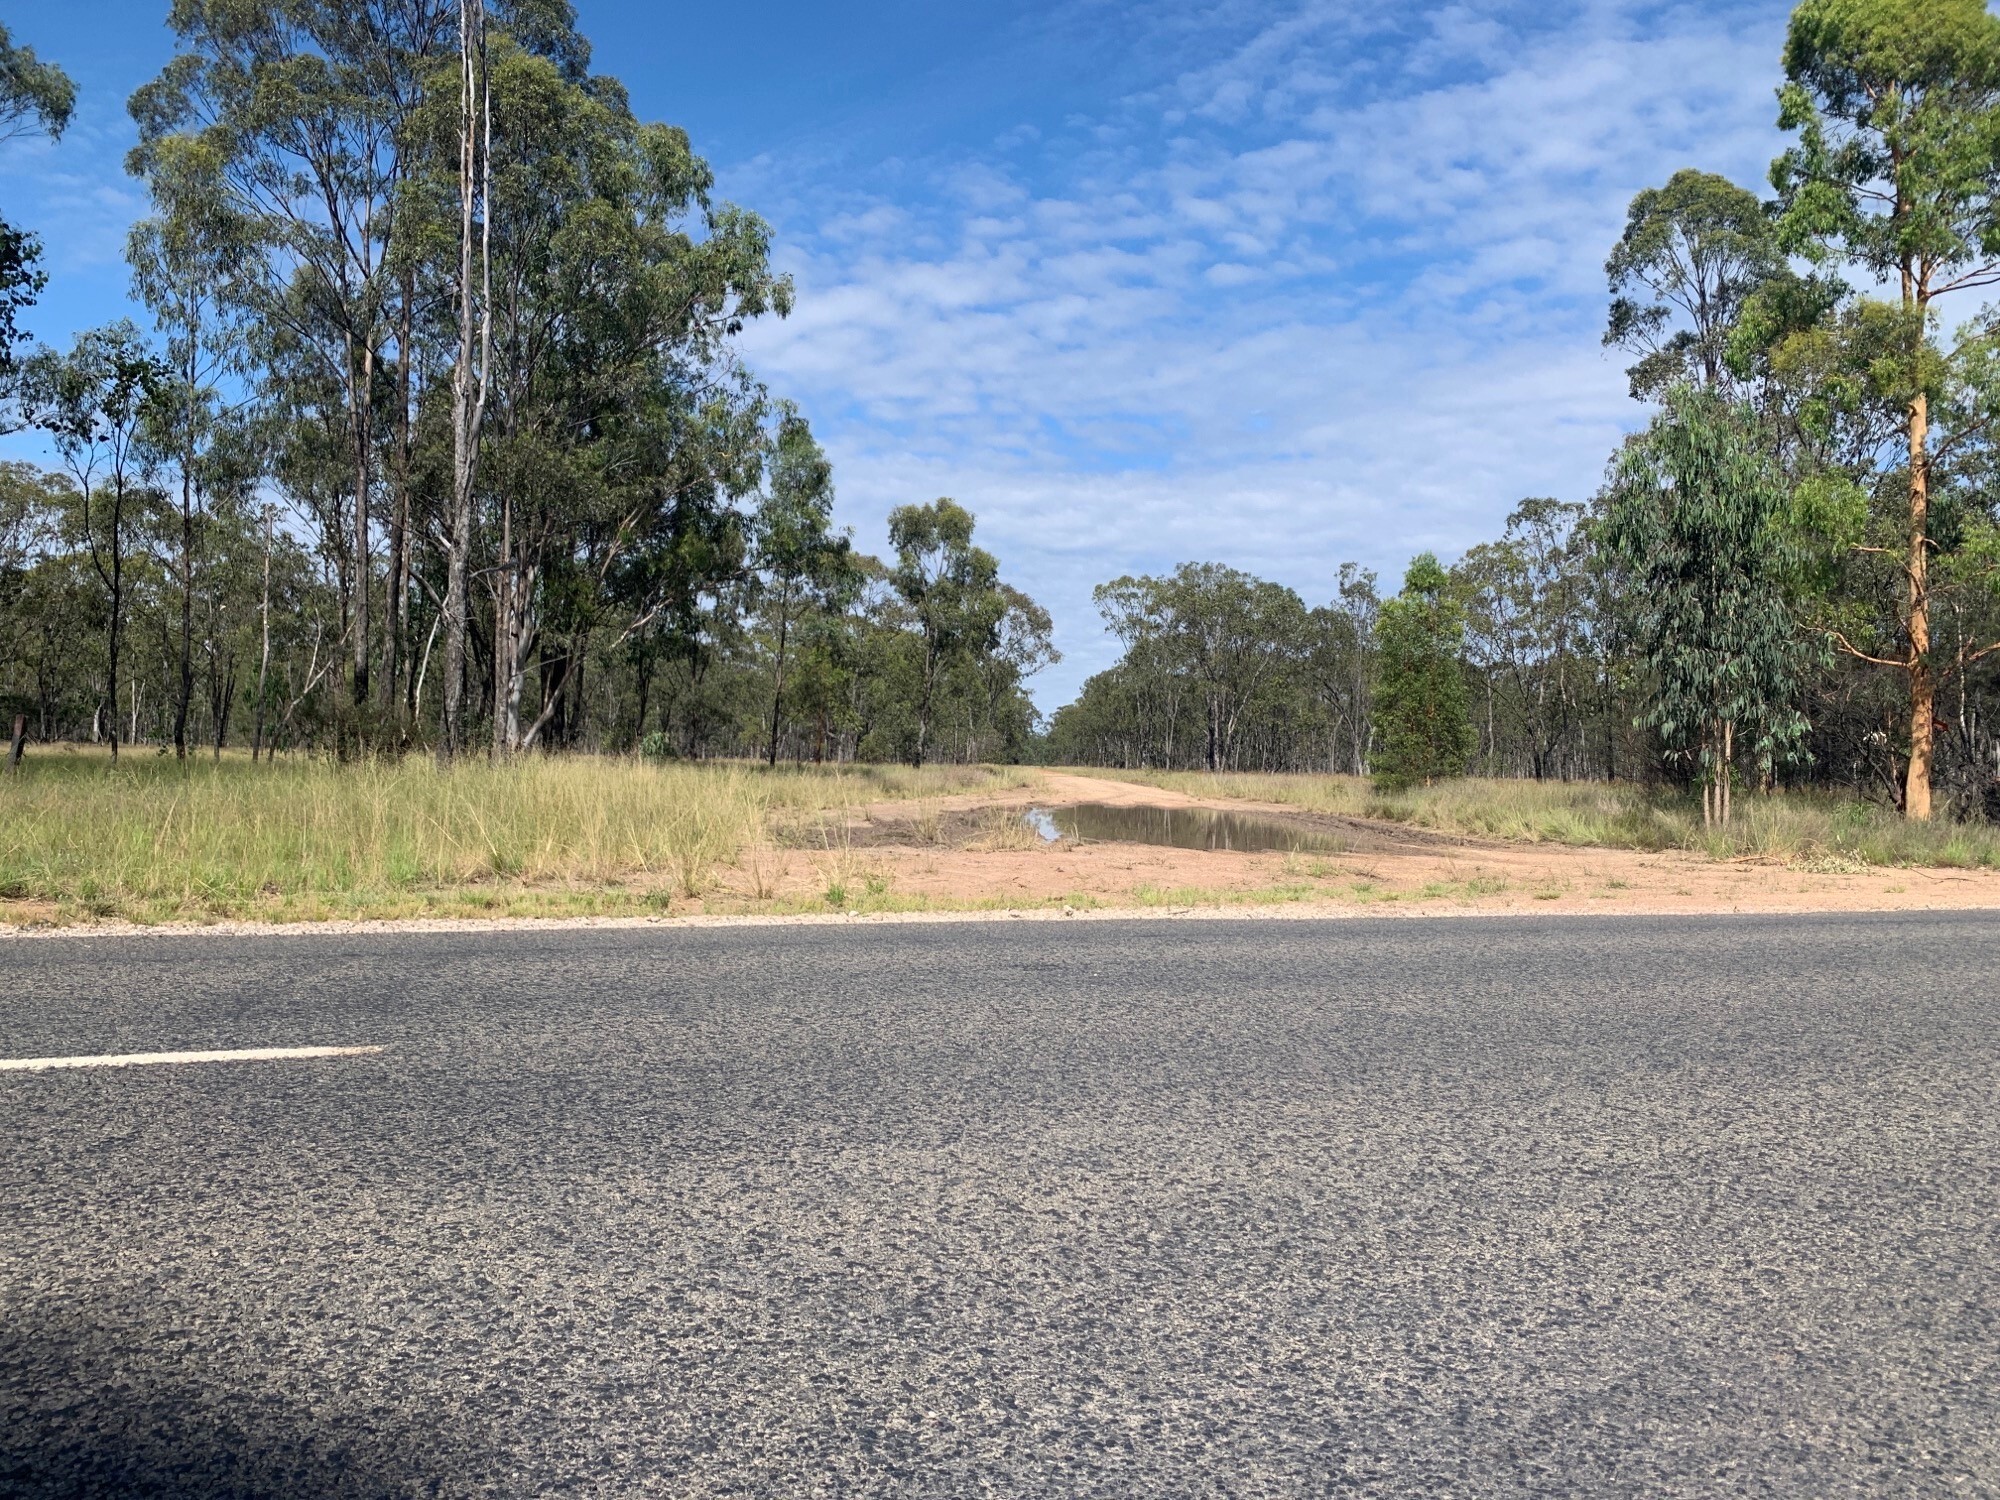 An empty road with bushland surrounding.